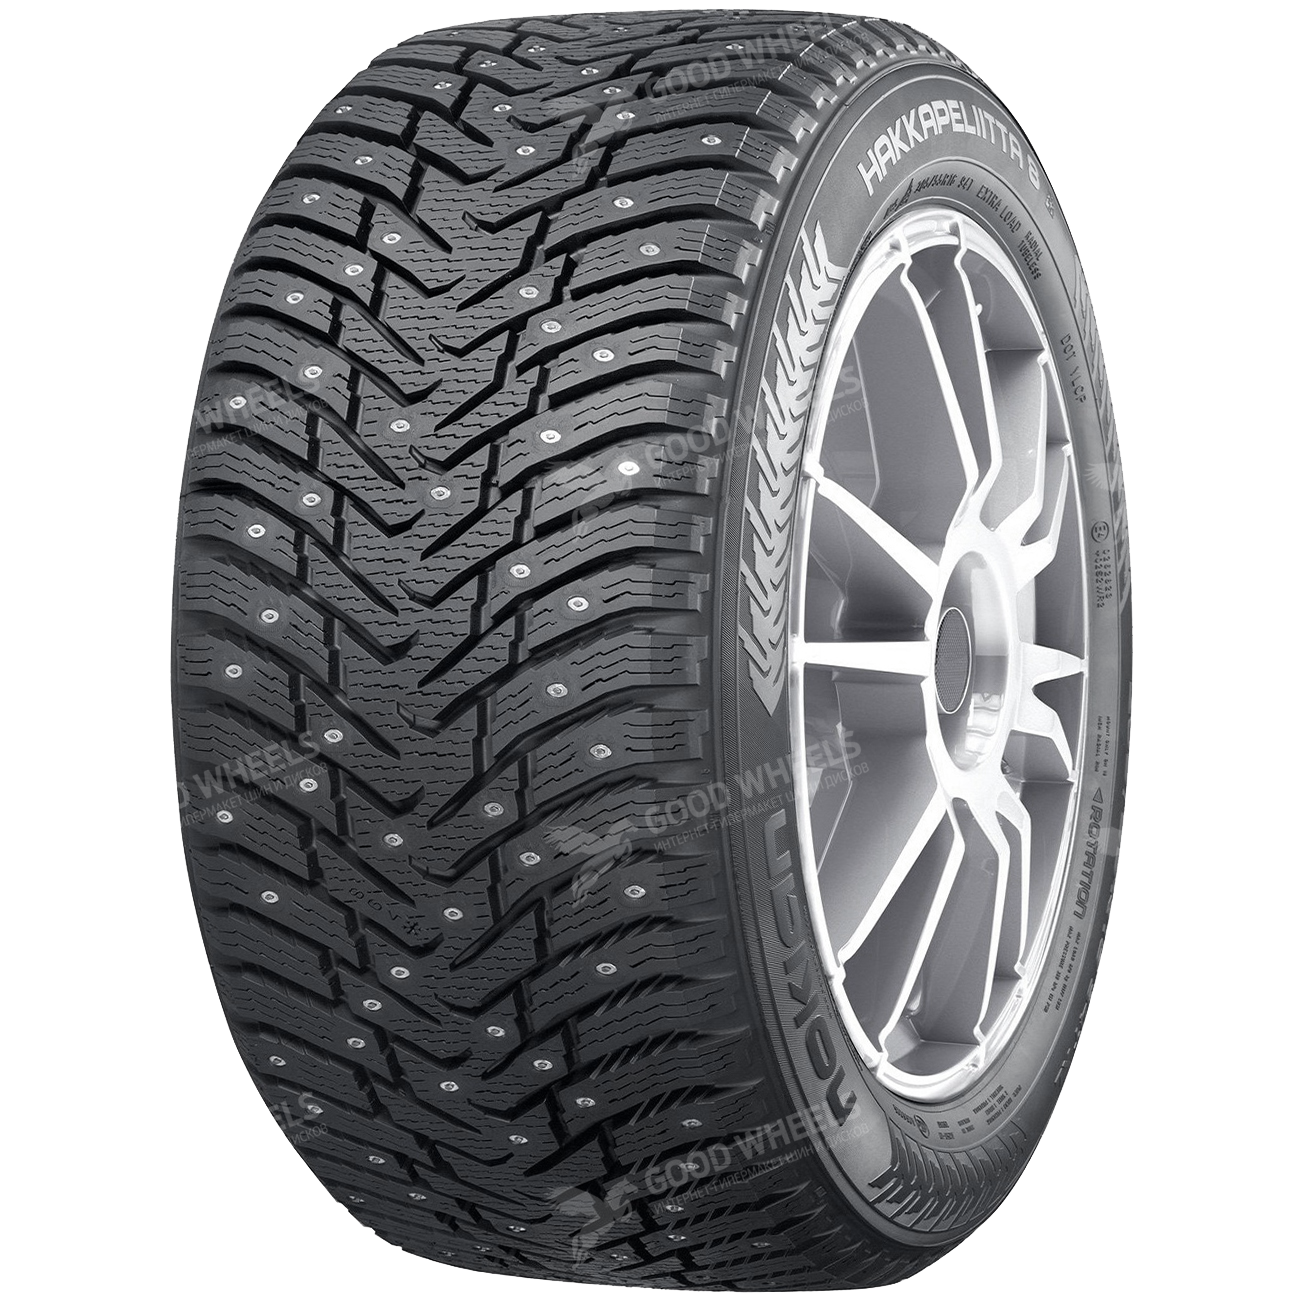 Goodyear Excellence 225/55 r17 97y RUNFLAT. Excellence 225/55 r17 97y. Шины Dunlop SP Winter Ice 02. 205/60r16 Nokian HKPL 8 XL 96t.